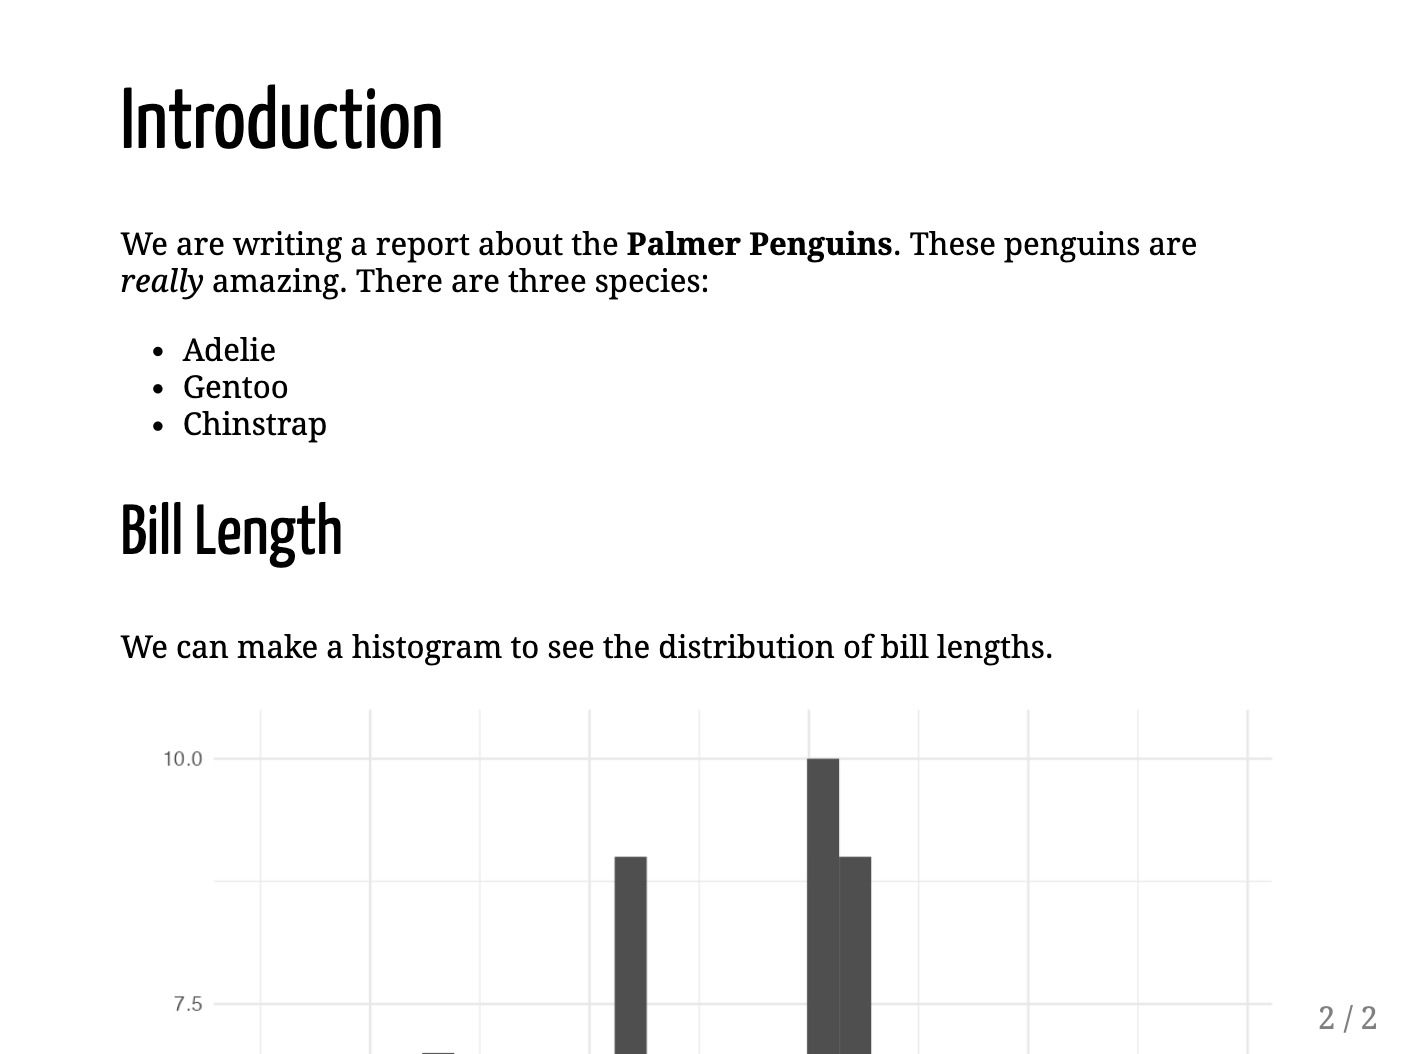 powerpoint presentations with r markdown